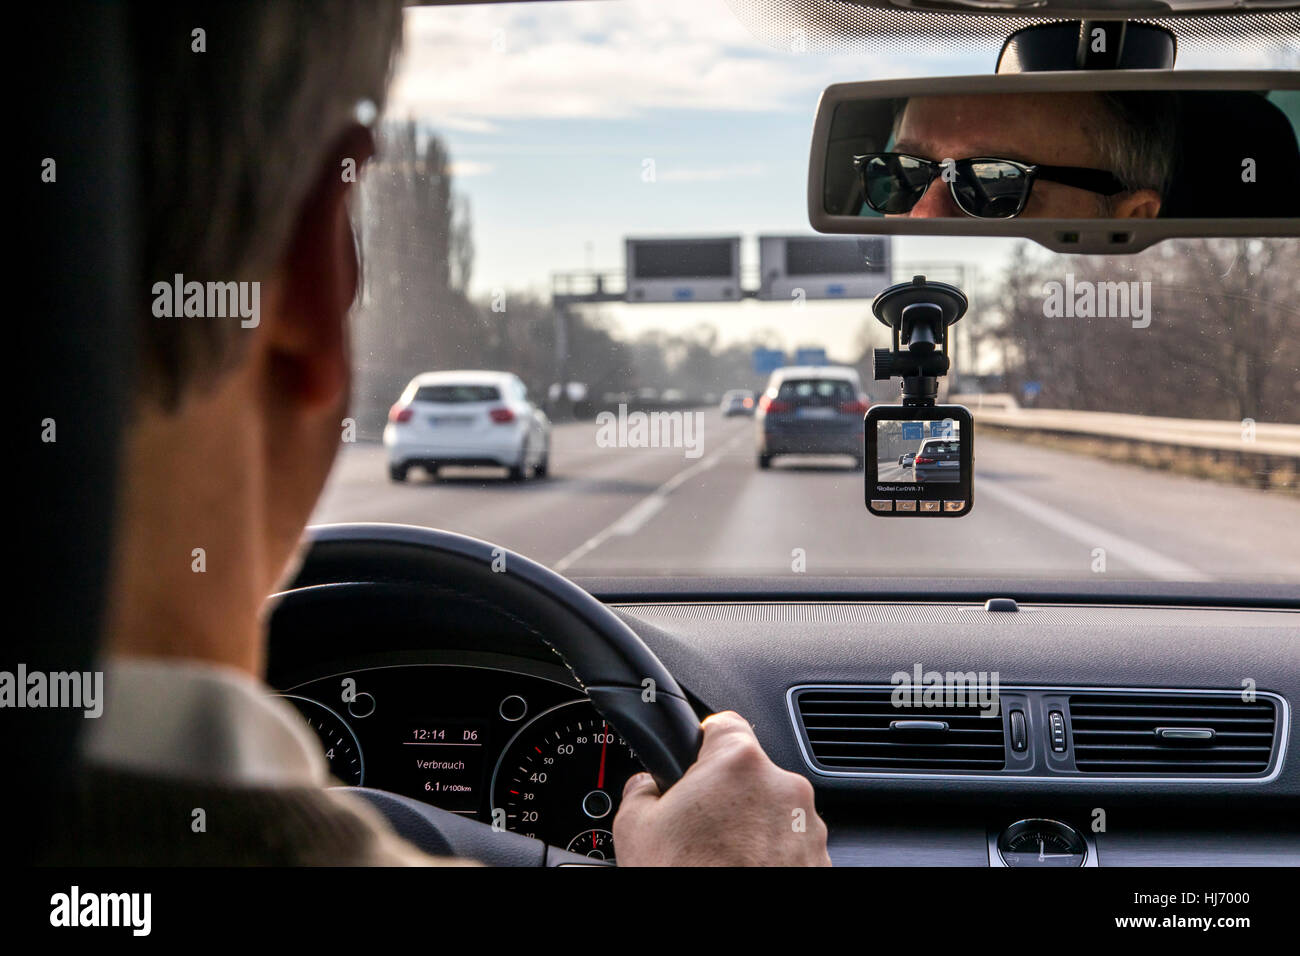 https://c8.alamy.com/comp/HJ7000/dashcam-in-a-passenger-car-video-camera-on-the-windshield-permanently-HJ7000.jpg